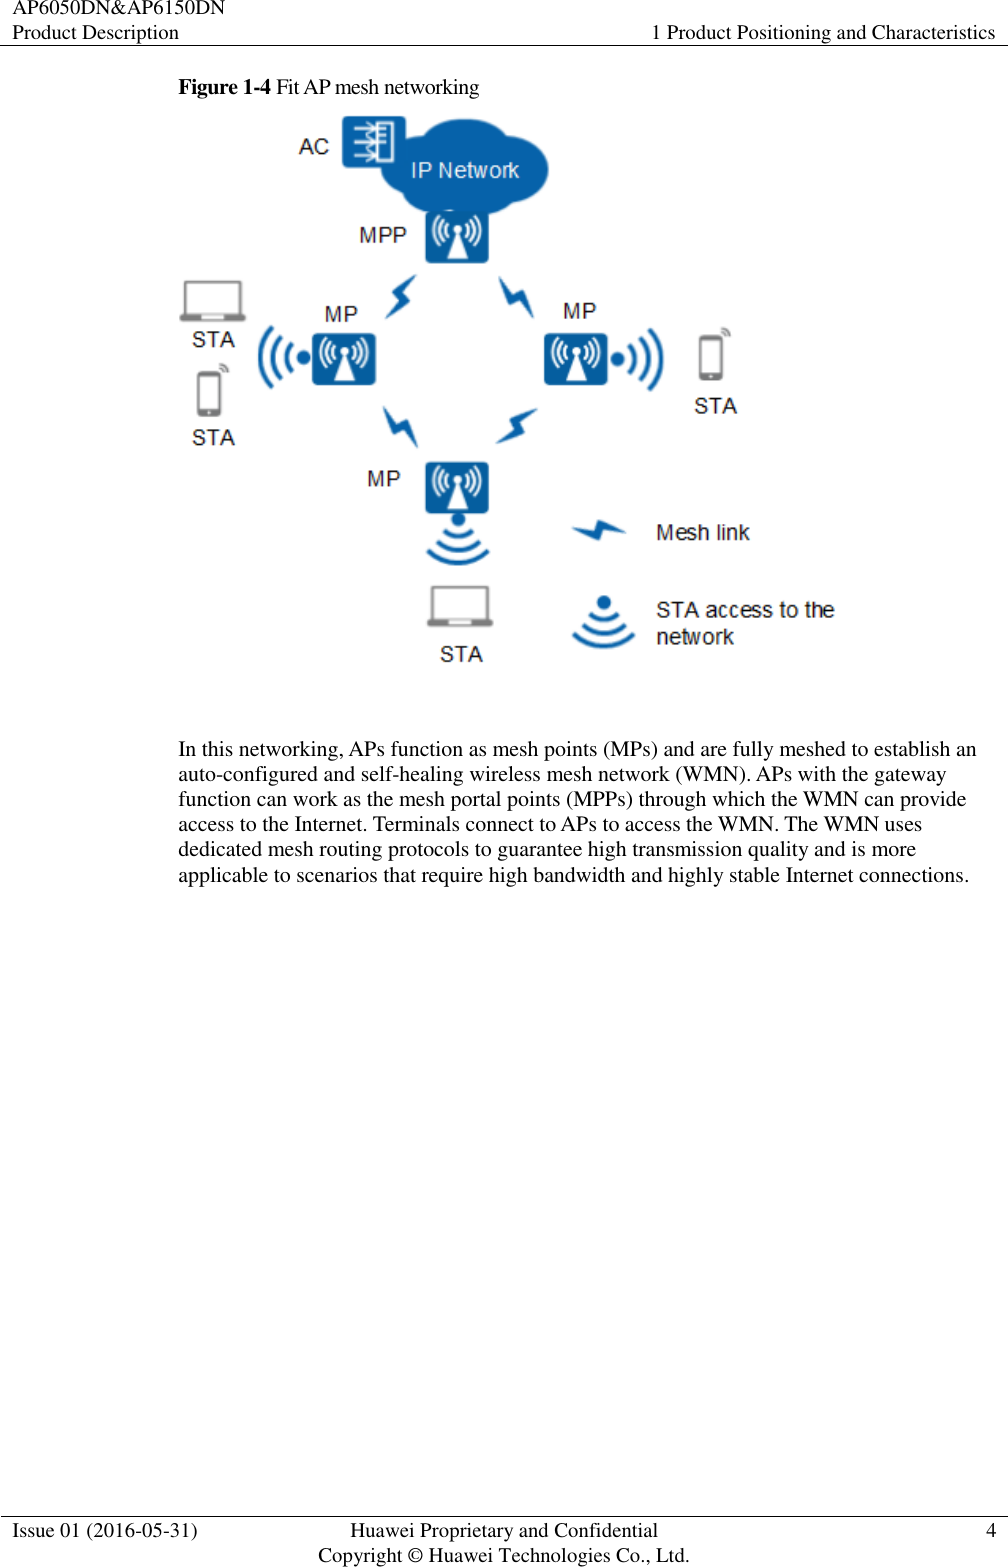 AP6050DN&amp;AP6150DN Product Description 1 Product Positioning and Characteristics  Issue 01 (2016-05-31) Huawei Proprietary and Confidential                                     Copyright © Huawei Technologies Co., Ltd. 4  Figure 1-4 Fit AP mesh networking   In this networking, APs function as mesh points (MPs) and are fully meshed to establish an auto-configured and self-healing wireless mesh network (WMN). APs with the gateway function can work as the mesh portal points (MPPs) through which the WMN can provide access to the Internet. Terminals connect to APs to access the WMN. The WMN uses dedicated mesh routing protocols to guarantee high transmission quality and is more applicable to scenarios that require high bandwidth and highly stable Internet connections. 